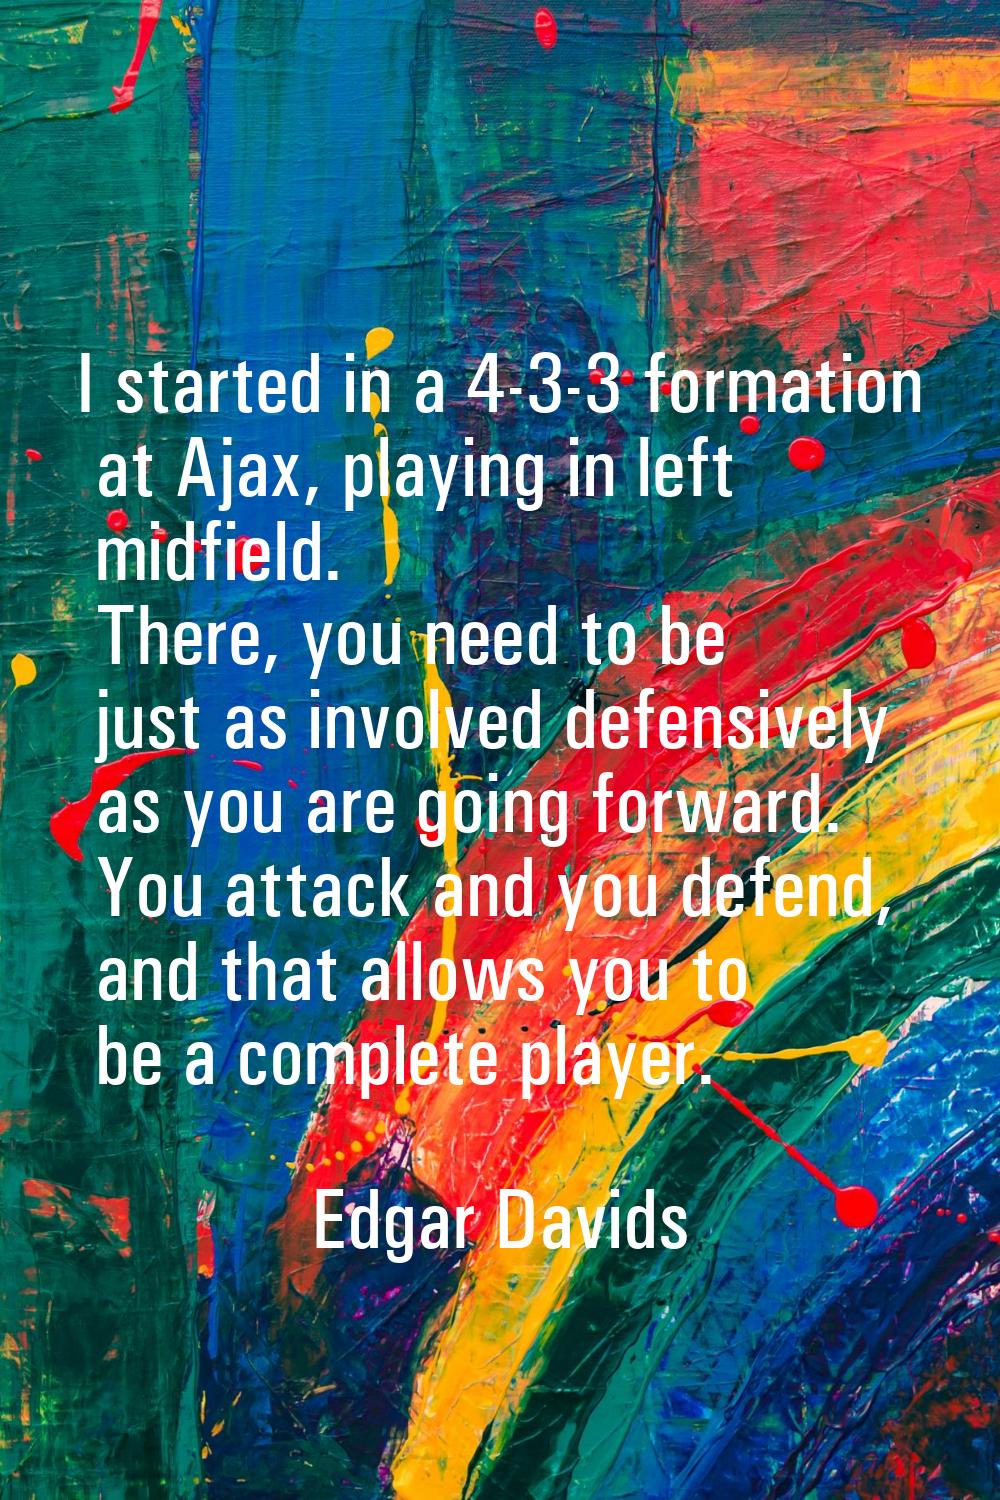 I started in a 4-3-3 formation at Ajax, playing in left midfield. There, you need to be just as inv